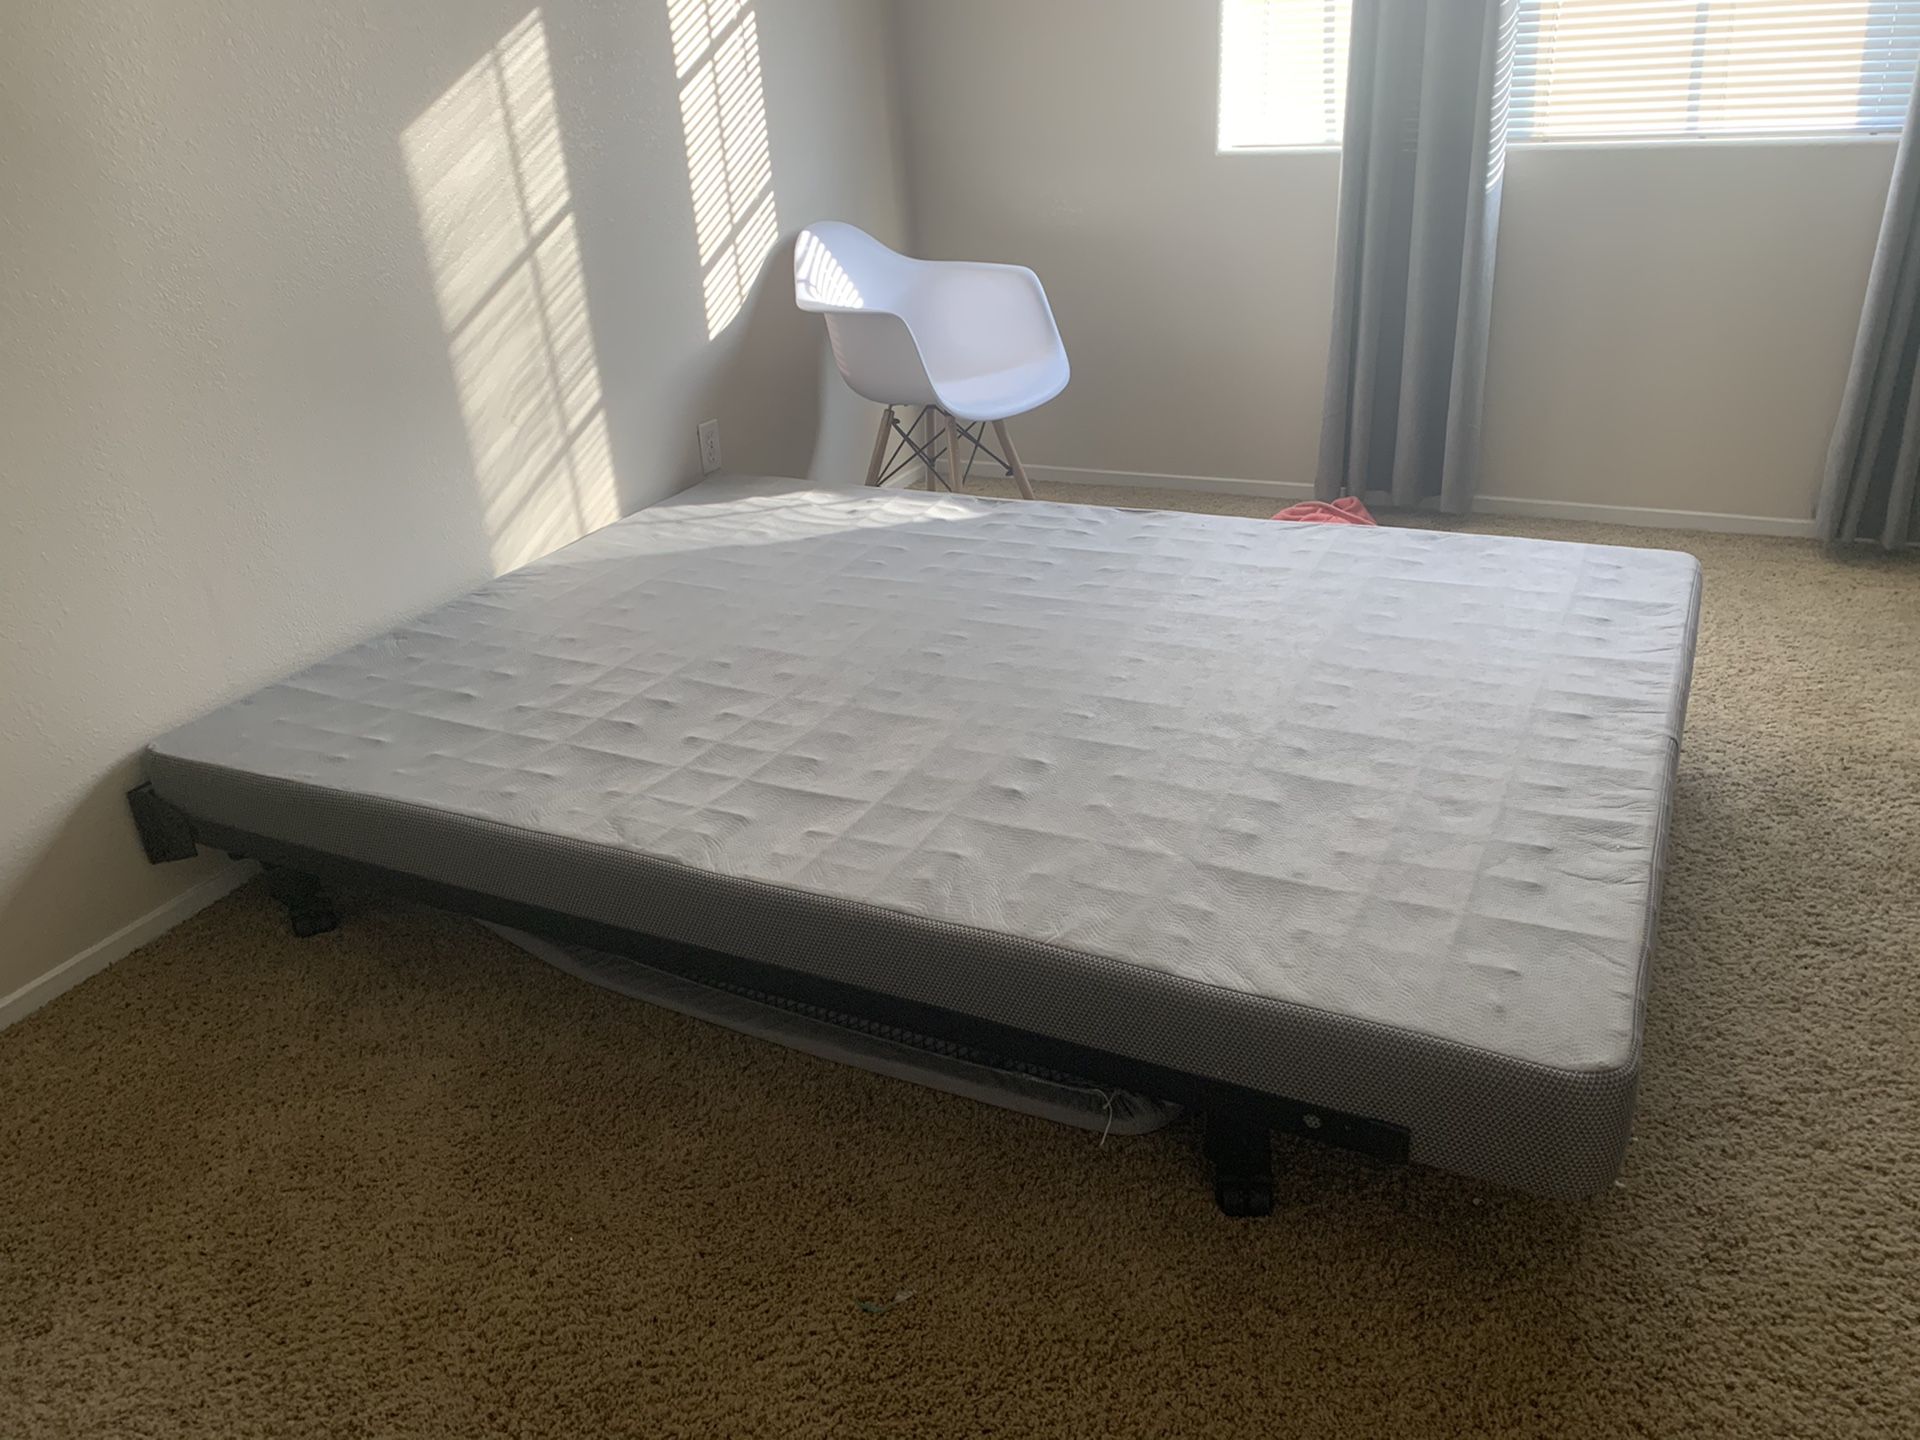 Queen box spring and bed frame